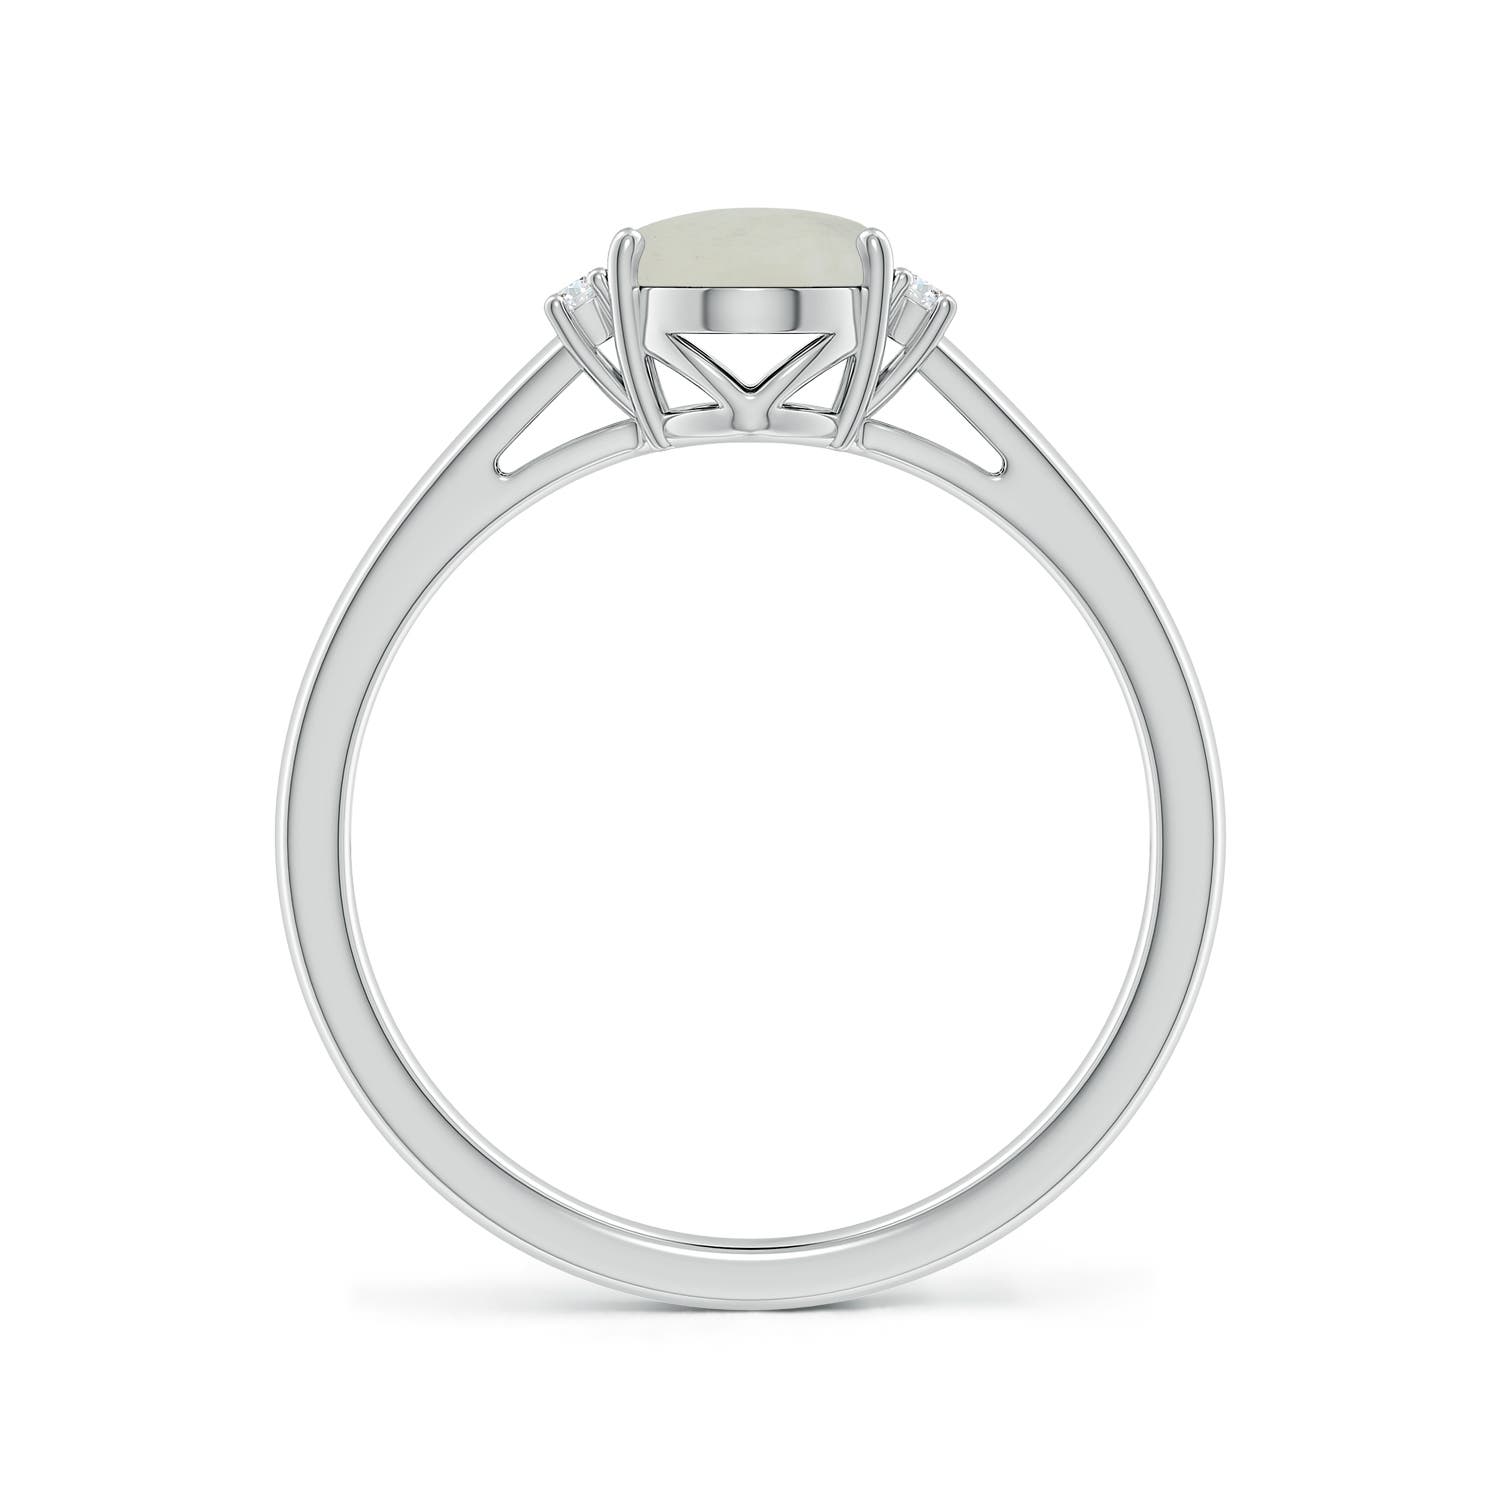 A - Moonstone / 1.17 CT / 14 KT White Gold